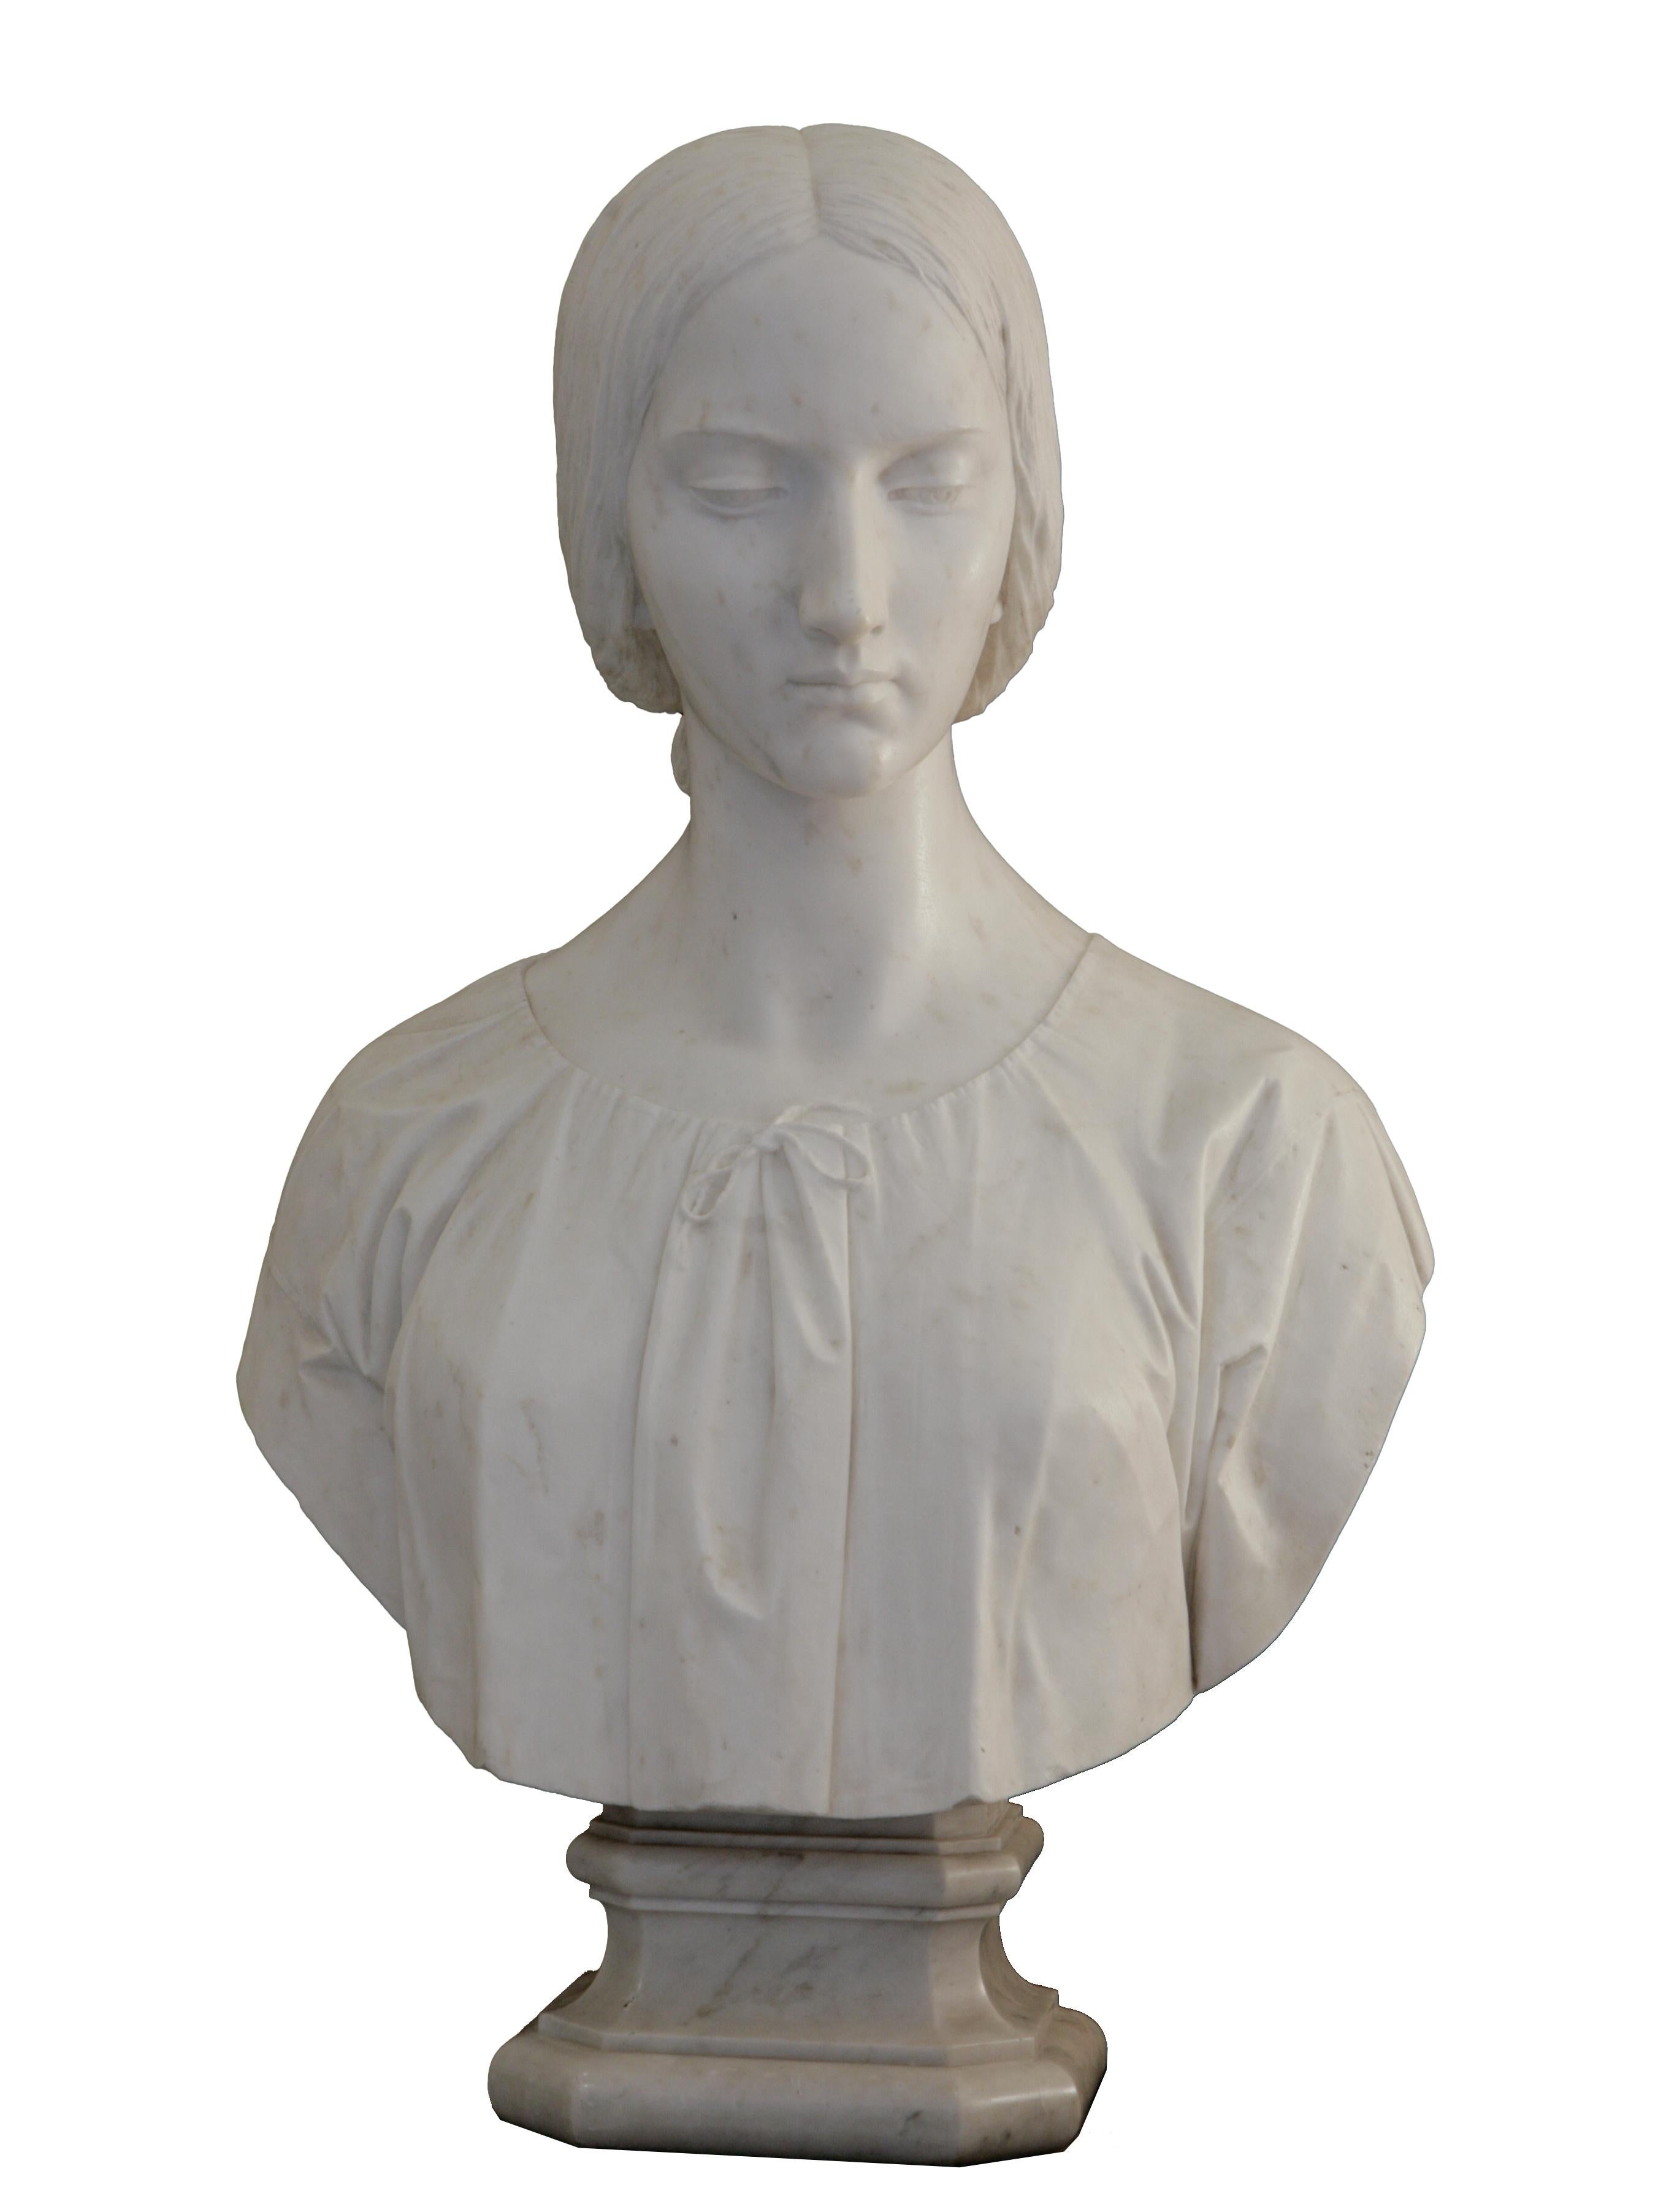 Unknown Figurative Sculpture - Female bust in white marble - 19th century